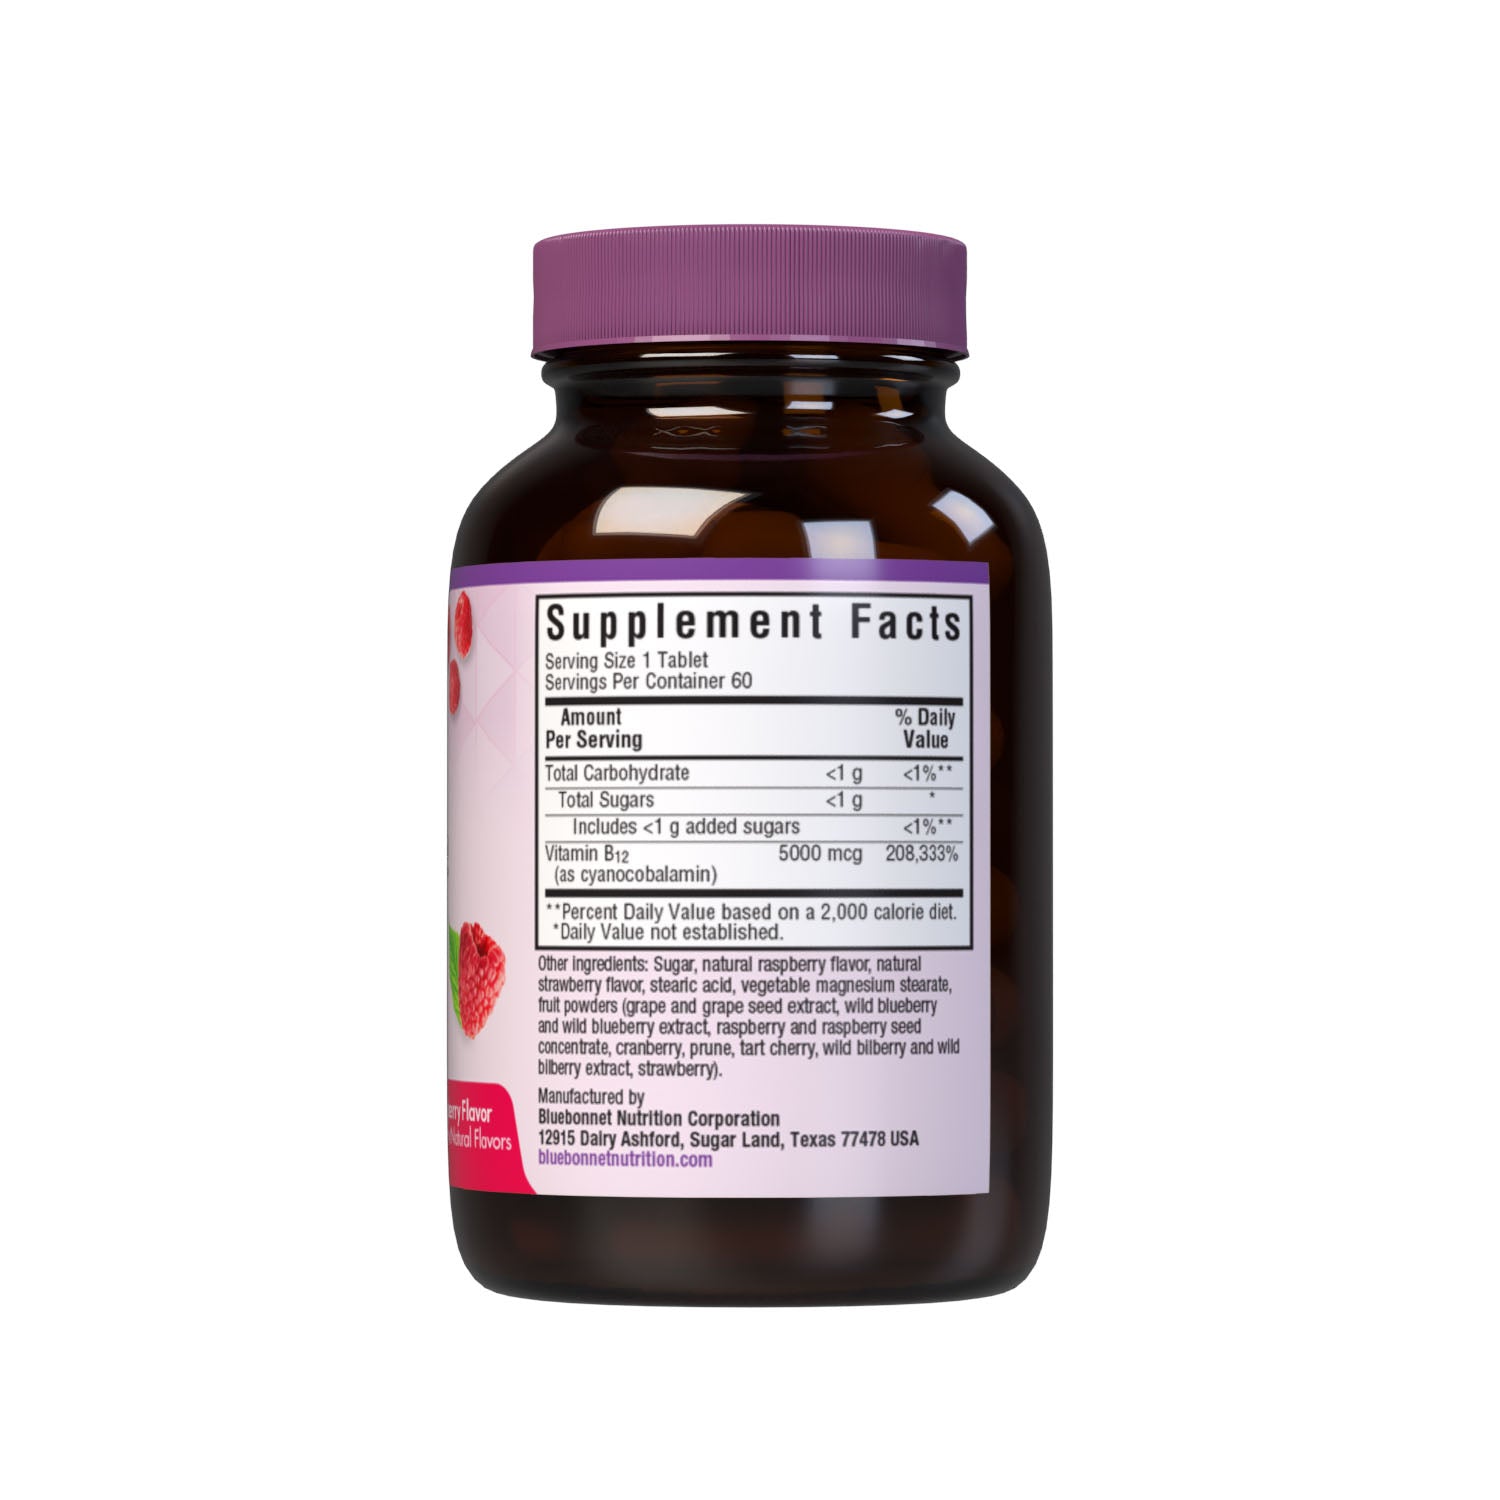 Bluebonnet’s EarthSweet Chewables Vitamin B12 5000 mcg Tablets are formulated with crystalline vitamin B12 that supports cellular energy production and nervous system health in a delicious raspberry flavor. Sweetened with EarthSweet, a proprietary sweetening mix of fruit powders and sugar cane crystals. 30 chewable tablets bottle. Supplement facts panel. #size_60 count